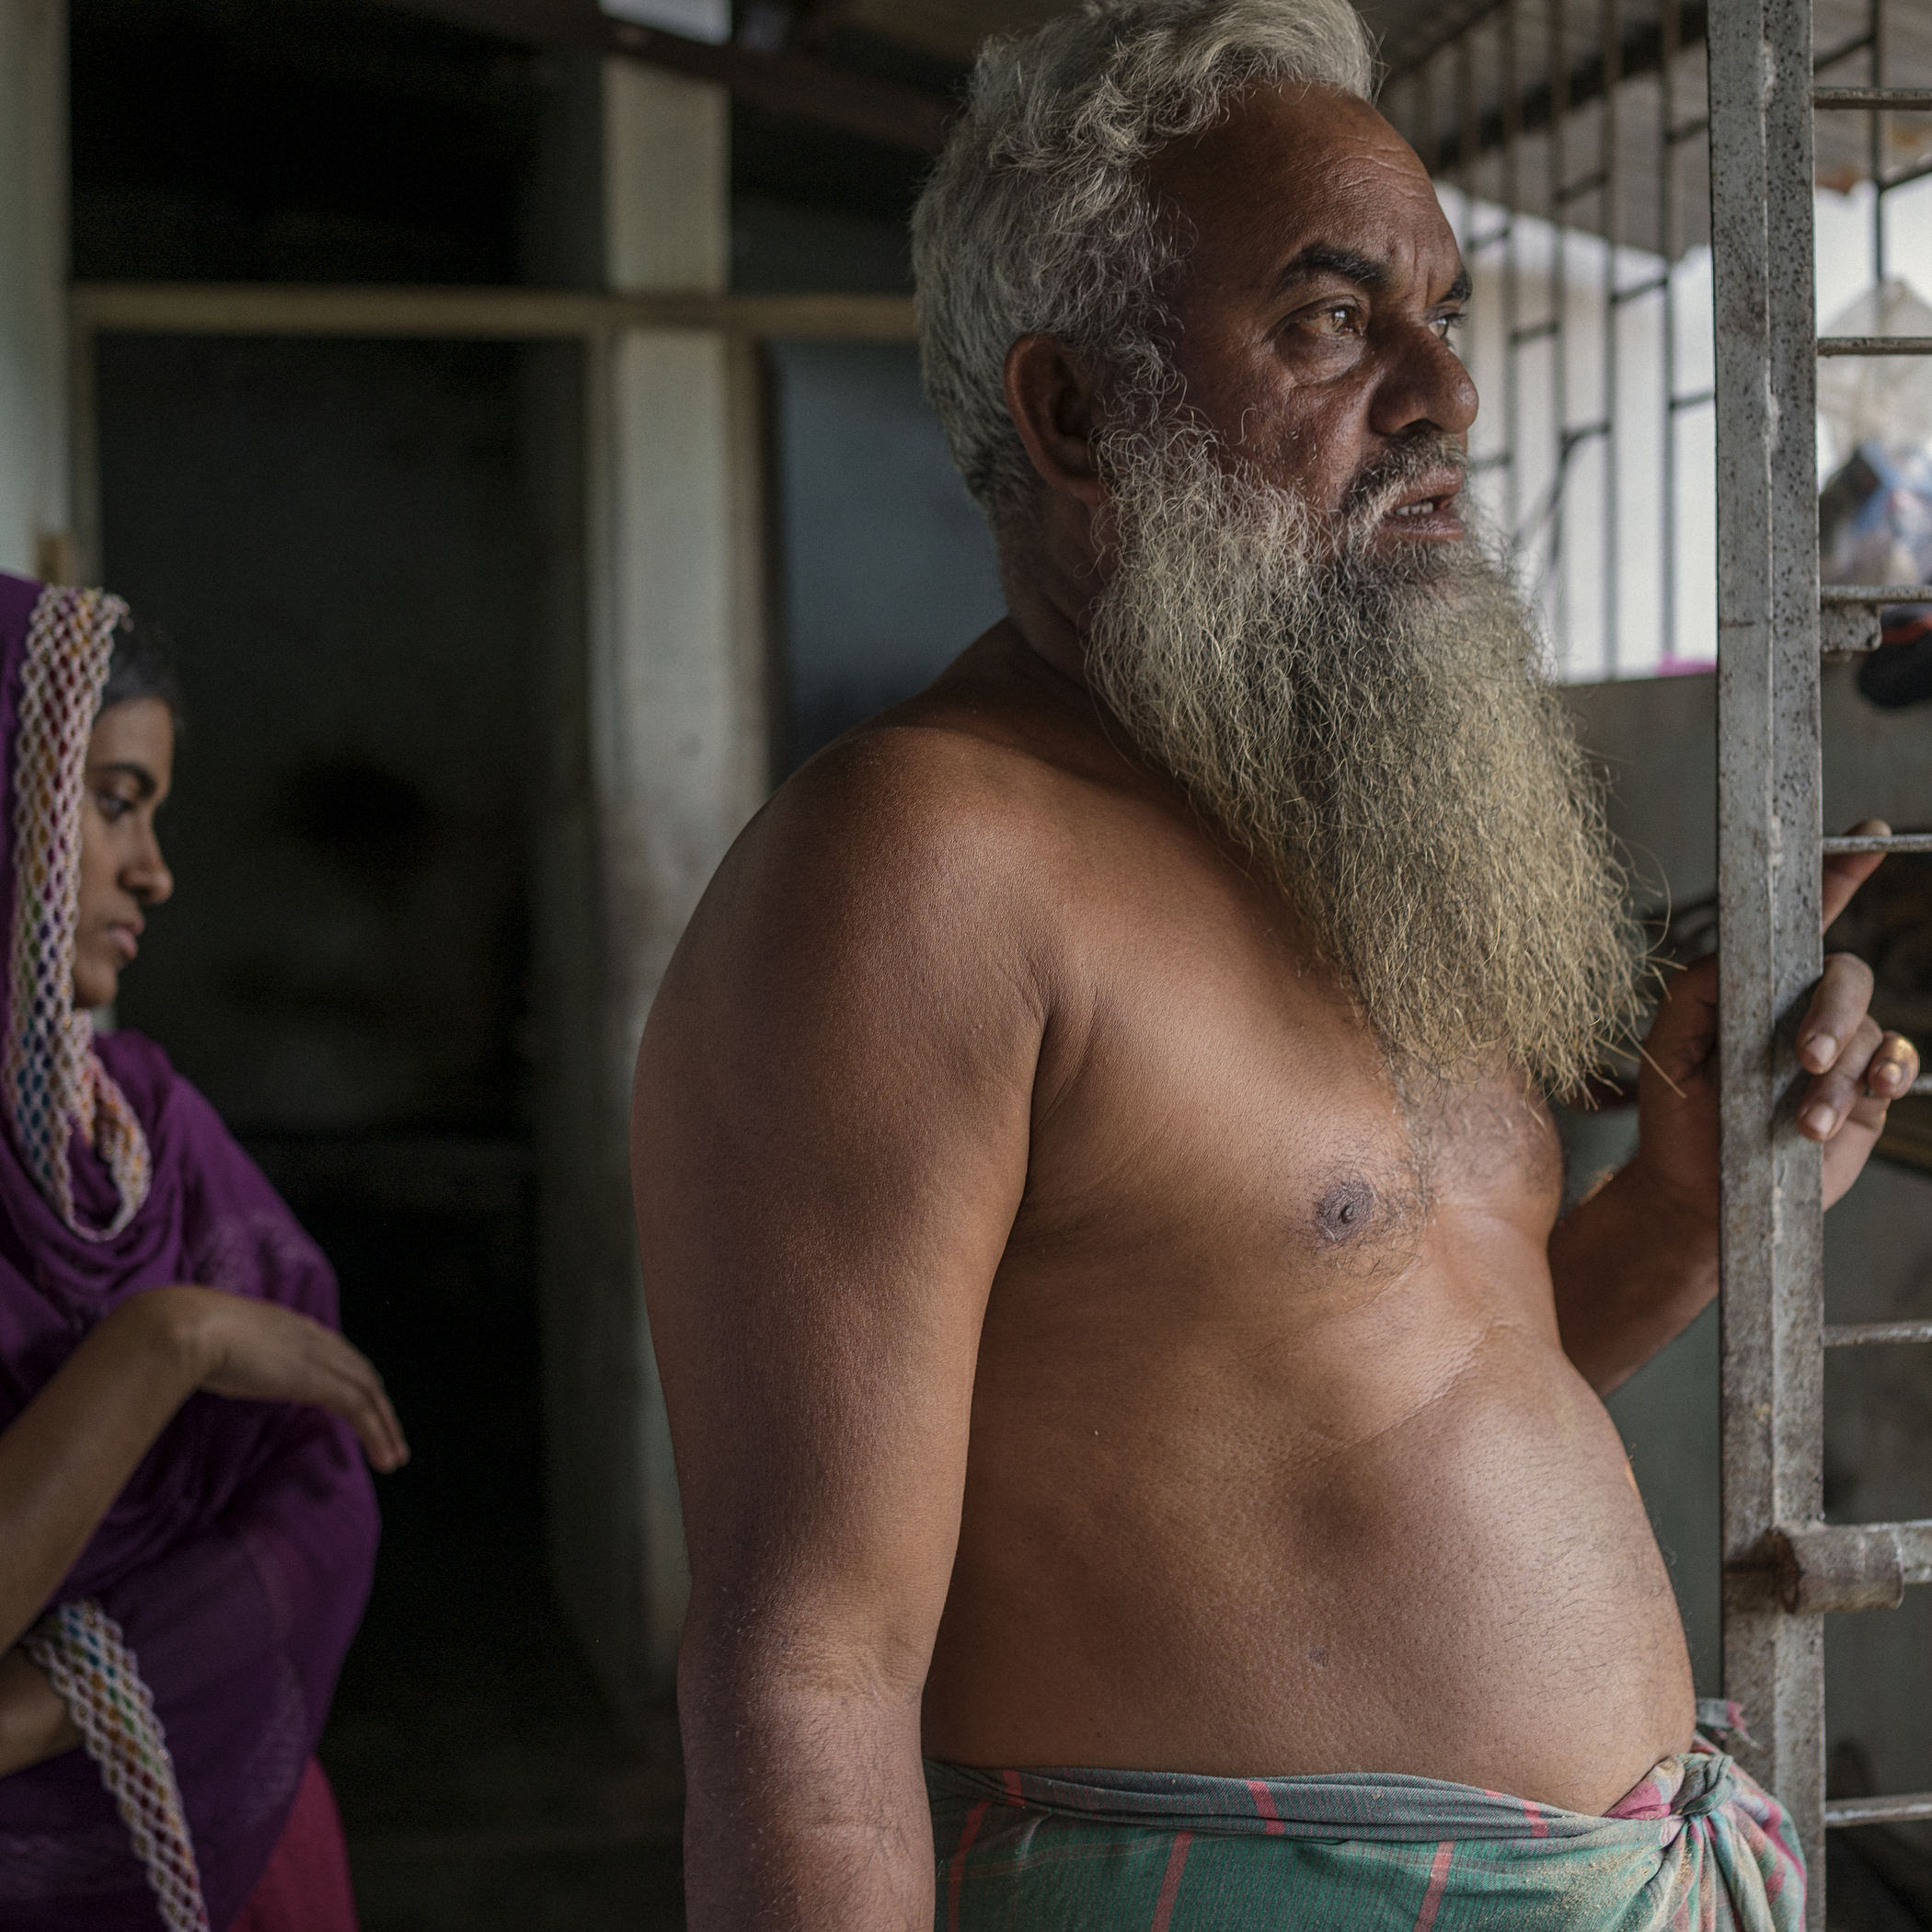 Toslim Mulla, a distant relative of Taslima, looks blankly at the window through which Rana Plaza could be viewed from their house, and gives an account of the disaster.